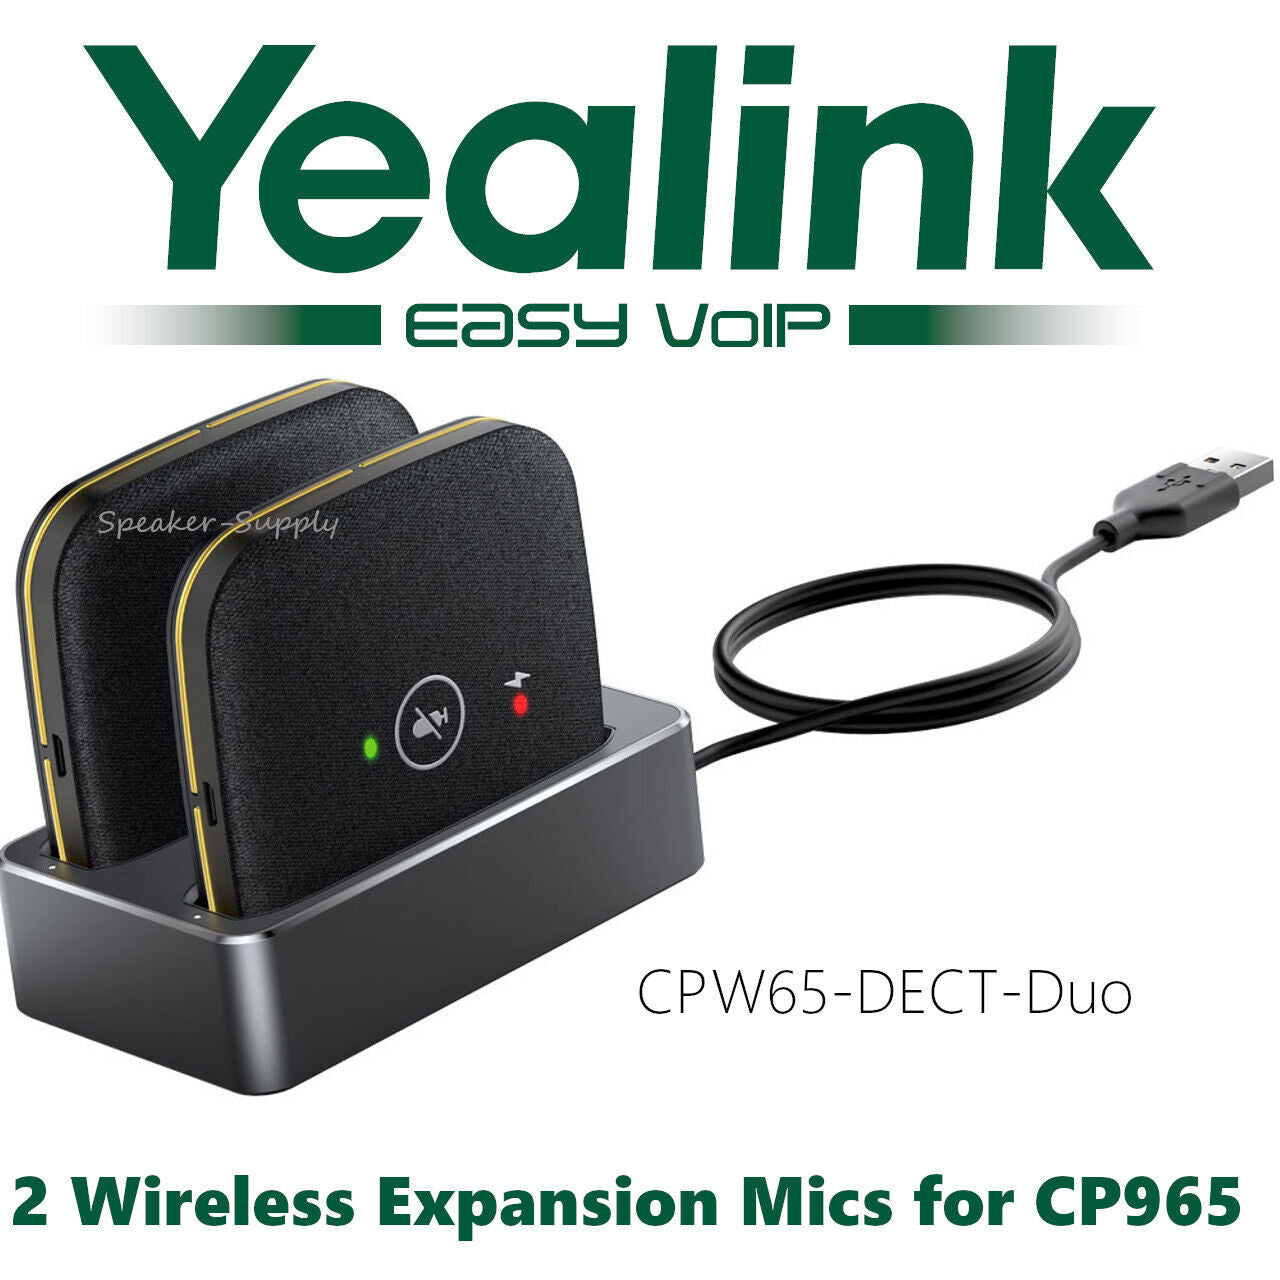 Yealink CPW65-DECT-Duo Wireless DECT Conference Microphones